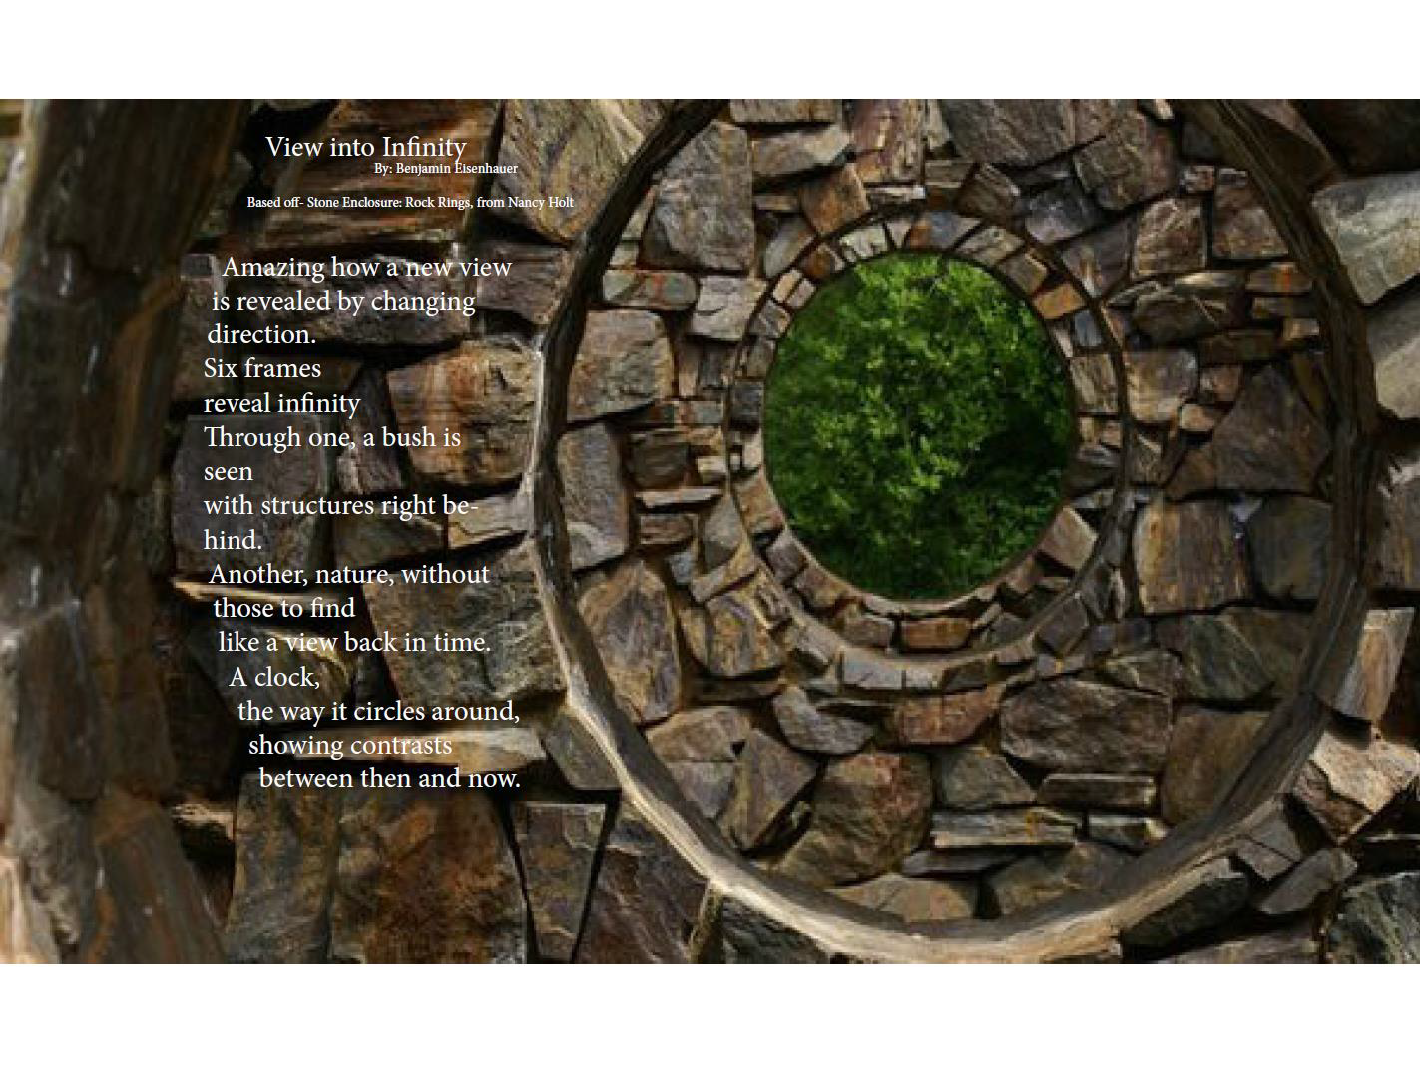 A poem curves around a round window in the Rock Rings sculpture